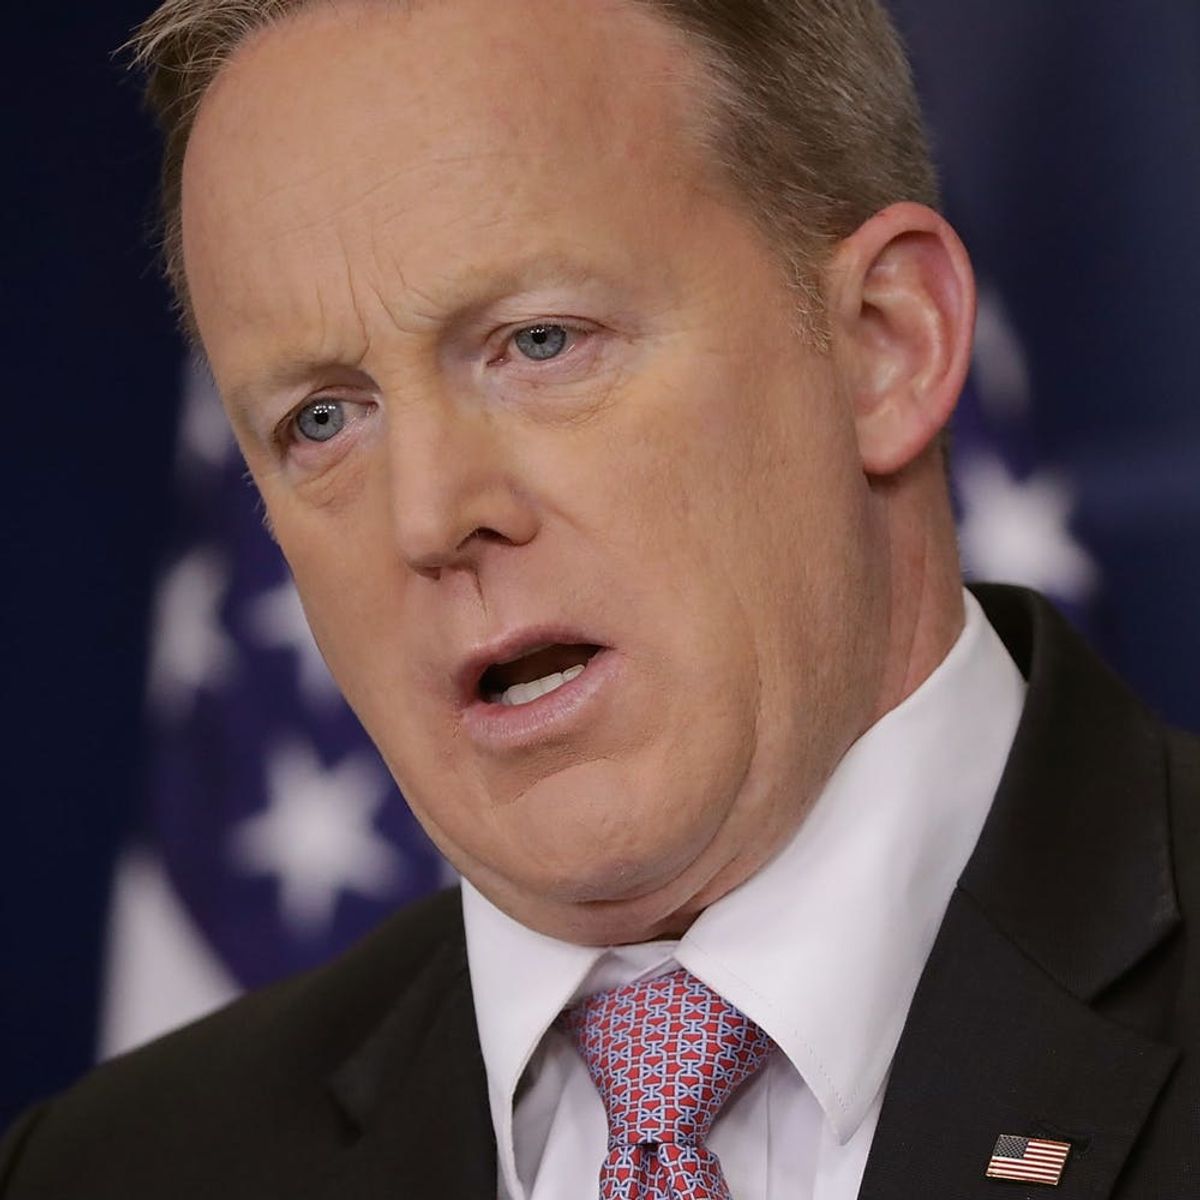 Sean Spicer Wore His US Pin Upside Down and Twitter Is Having a Freakout